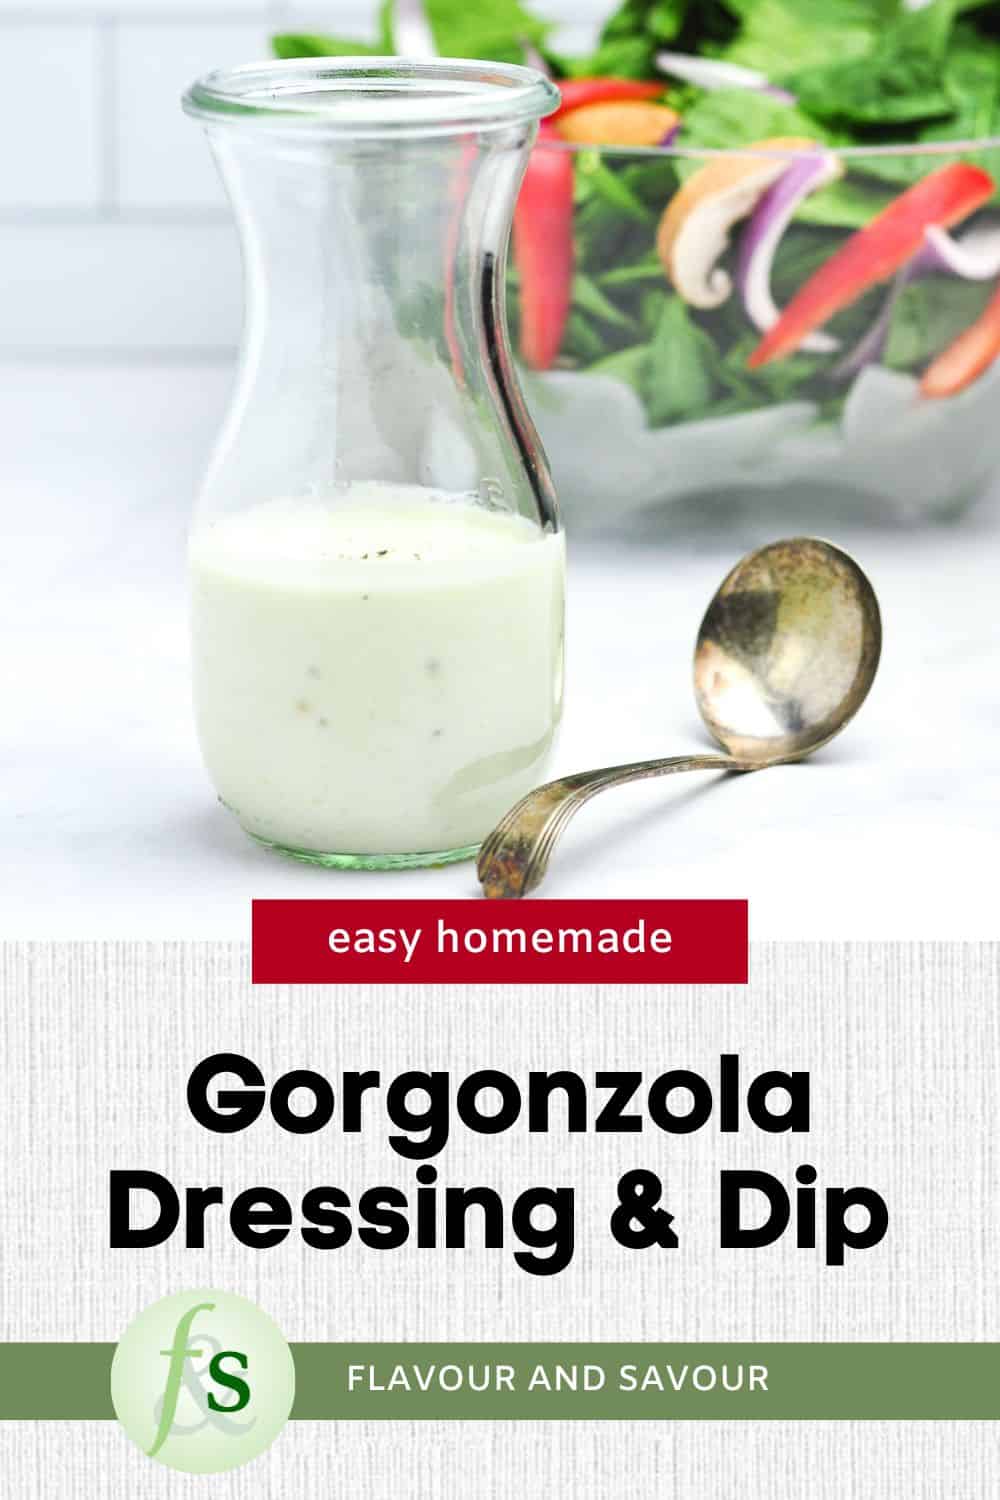 Image and text for Gorgonzola Dressing and Dip.